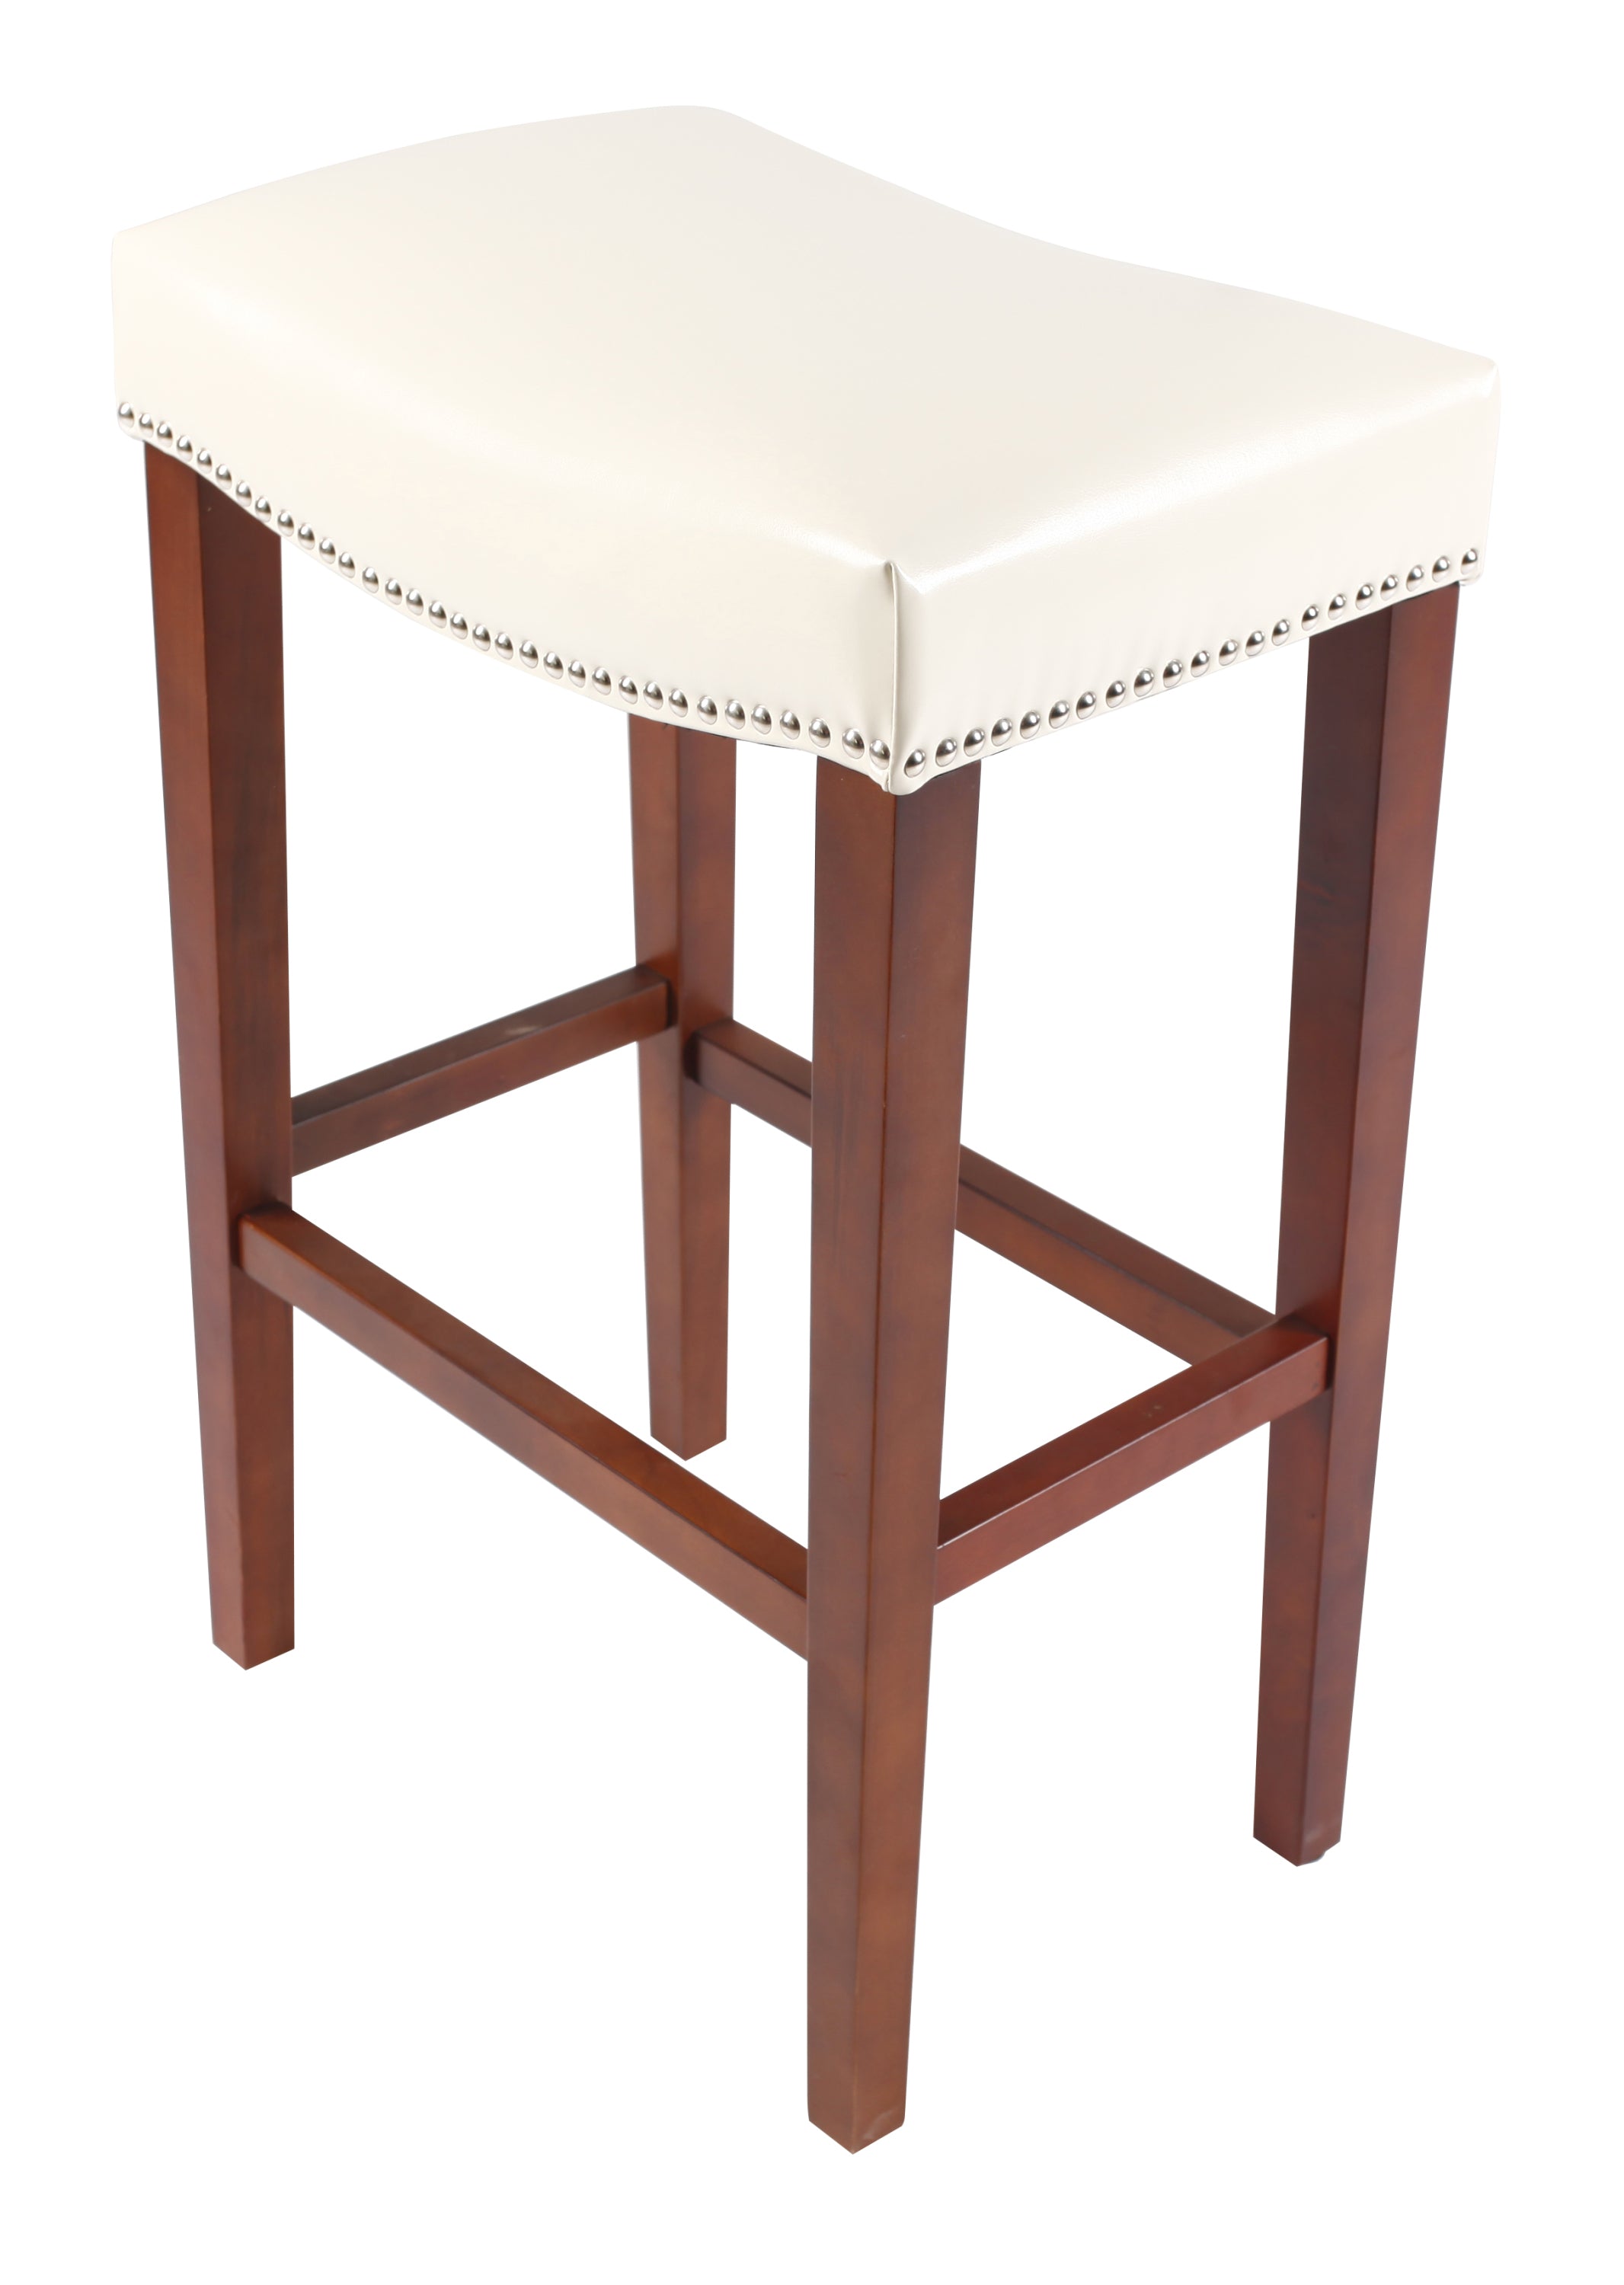 Set of 2 White Faux Leather Bar Height Stools with Solid Wood Legs